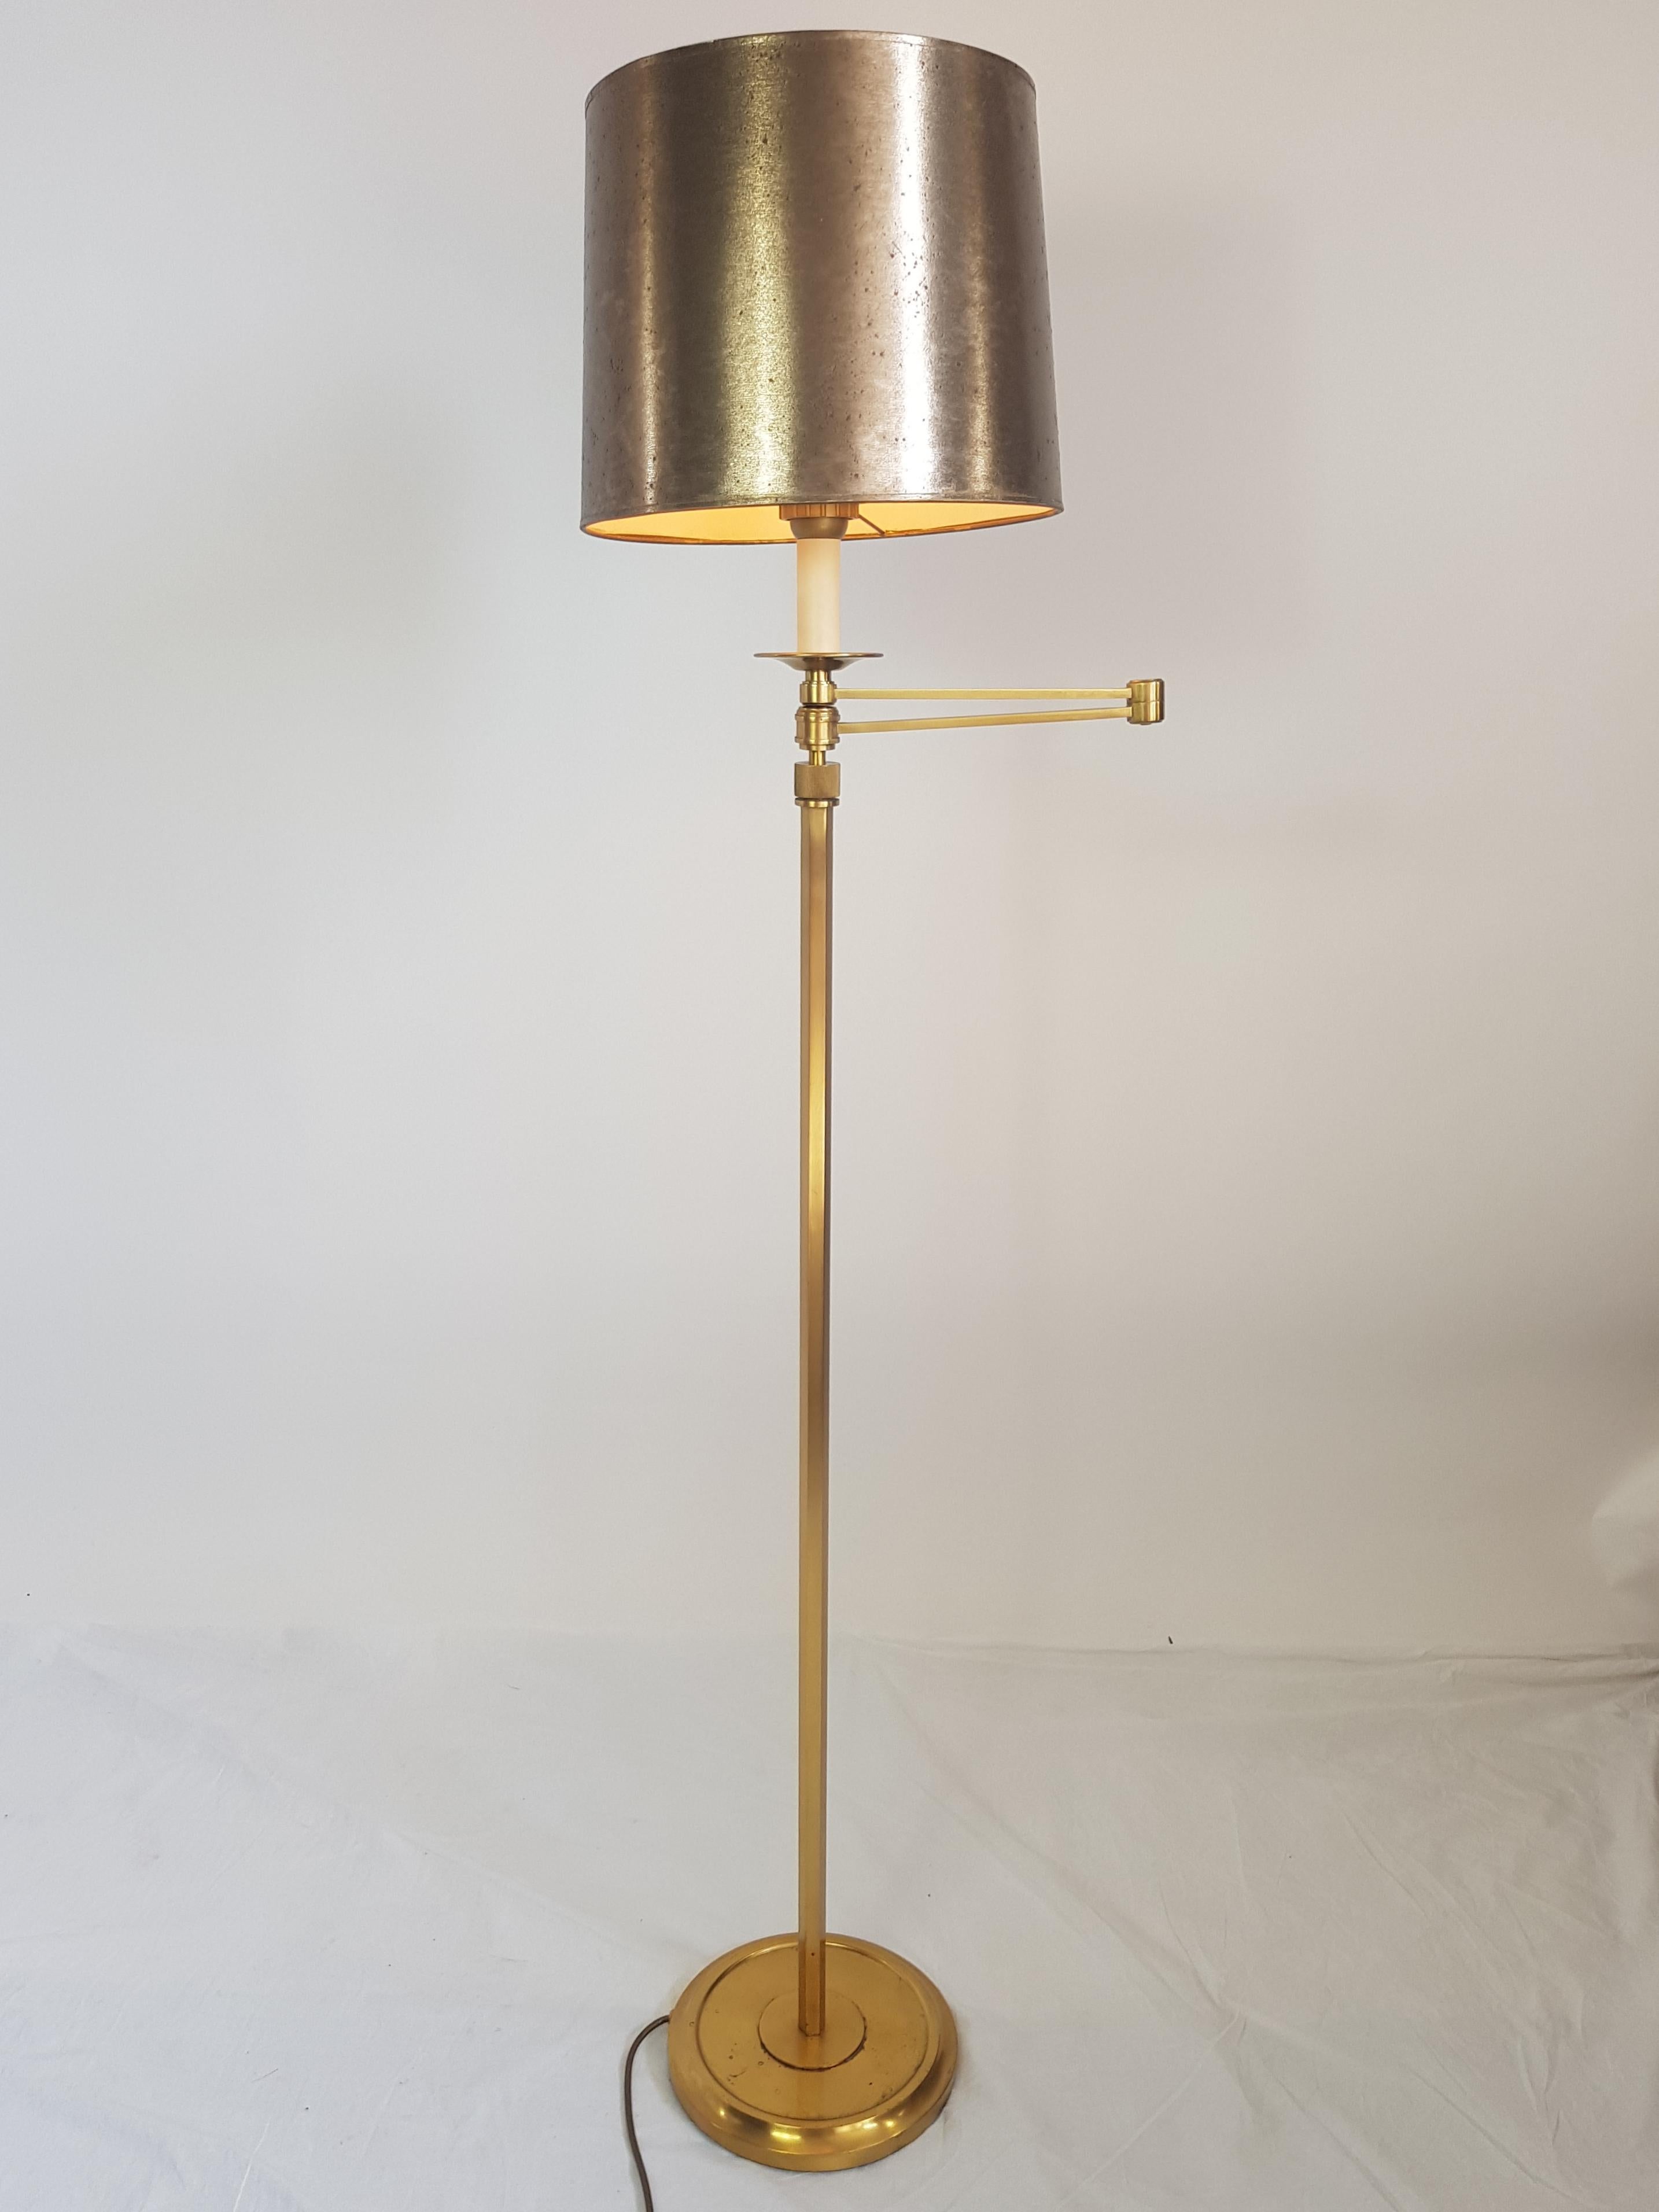 French, Bronze Floor Lamp, Liseuse Maison Bagès, Golden Lampshade, 1970s For Sale 6